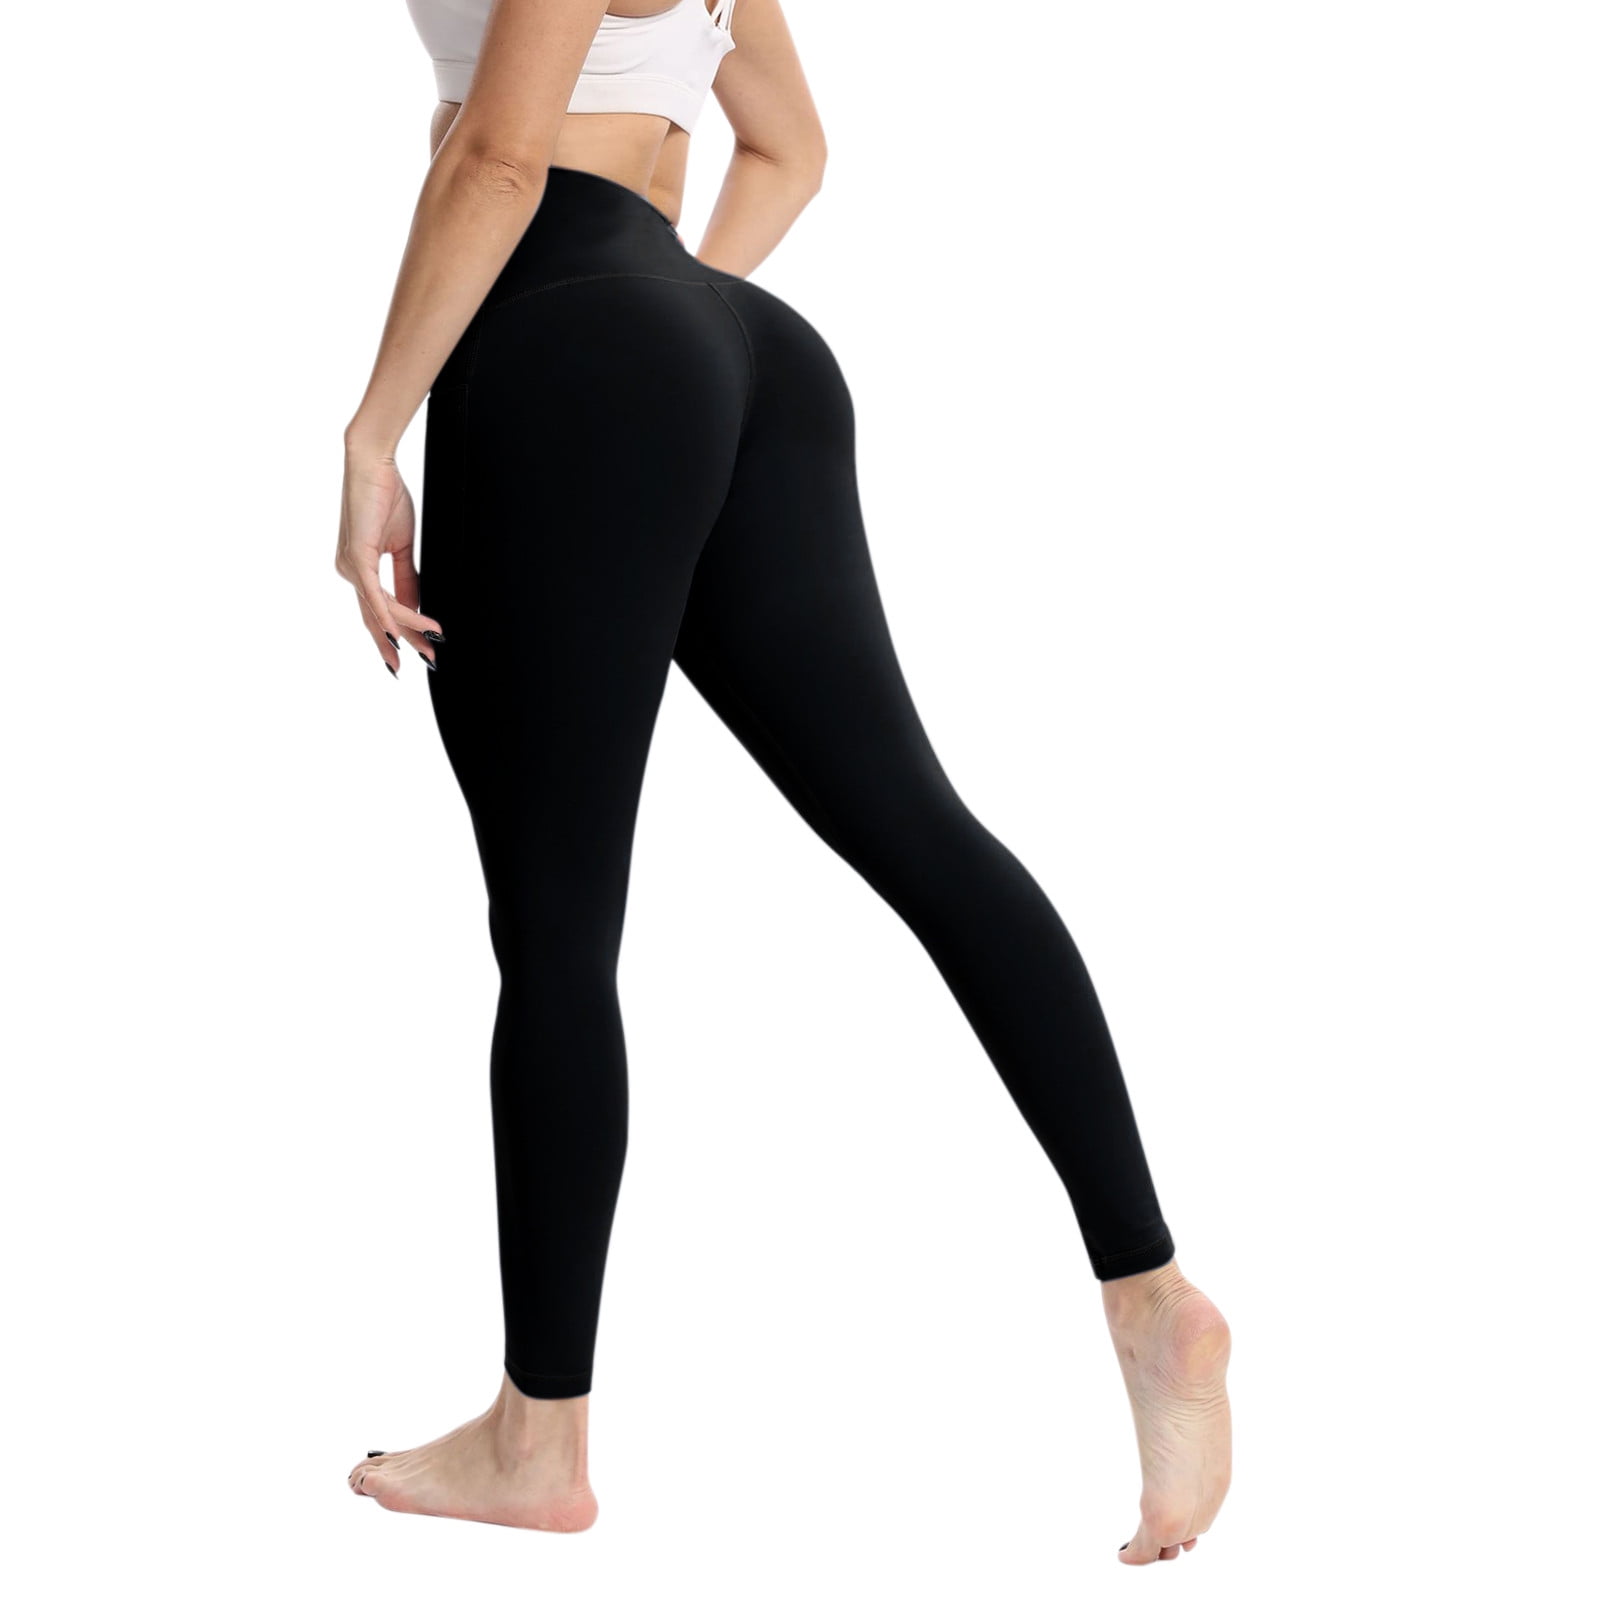 Women' Yoga Pants Bright Sports Pants Thin High Waist Fitness Pantsyoga  pants for women with pockets boho yoga pants for women woman yoga pant